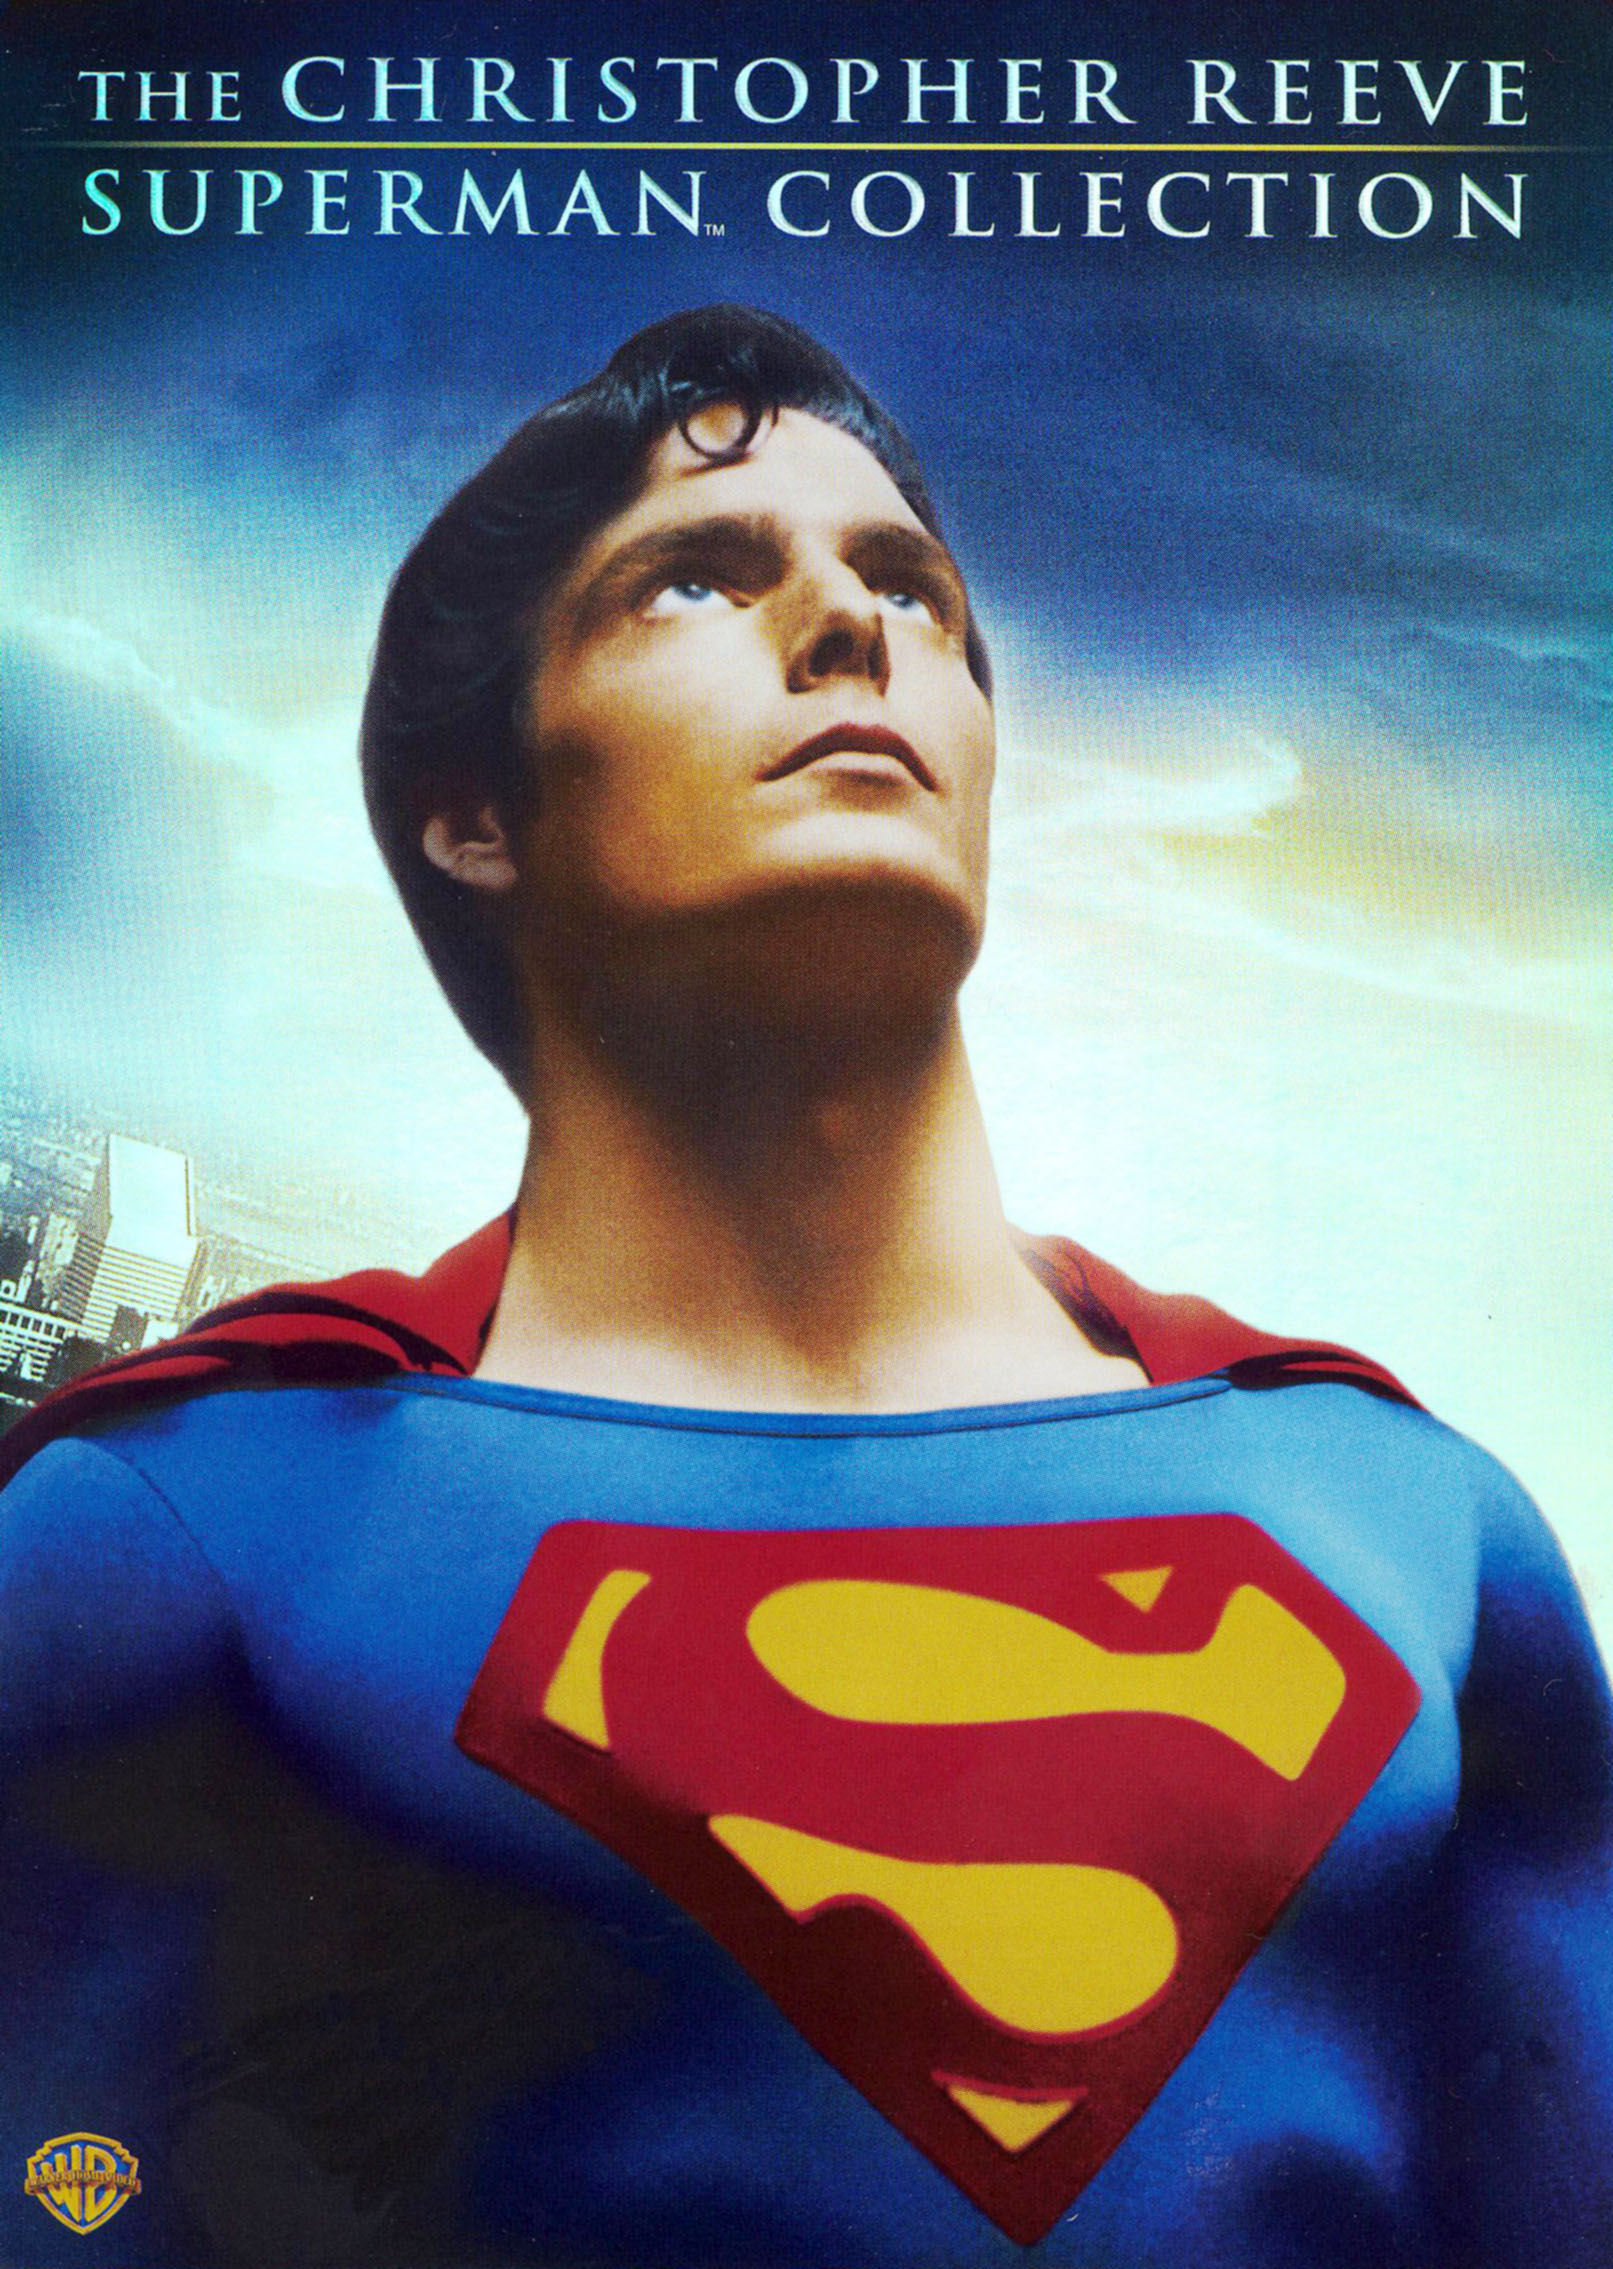 getTV - SUPERMAN: THE MOVIE (1978) with Christopher Reeve premiered 42  years ago tonight! Who's your favorite Superman?